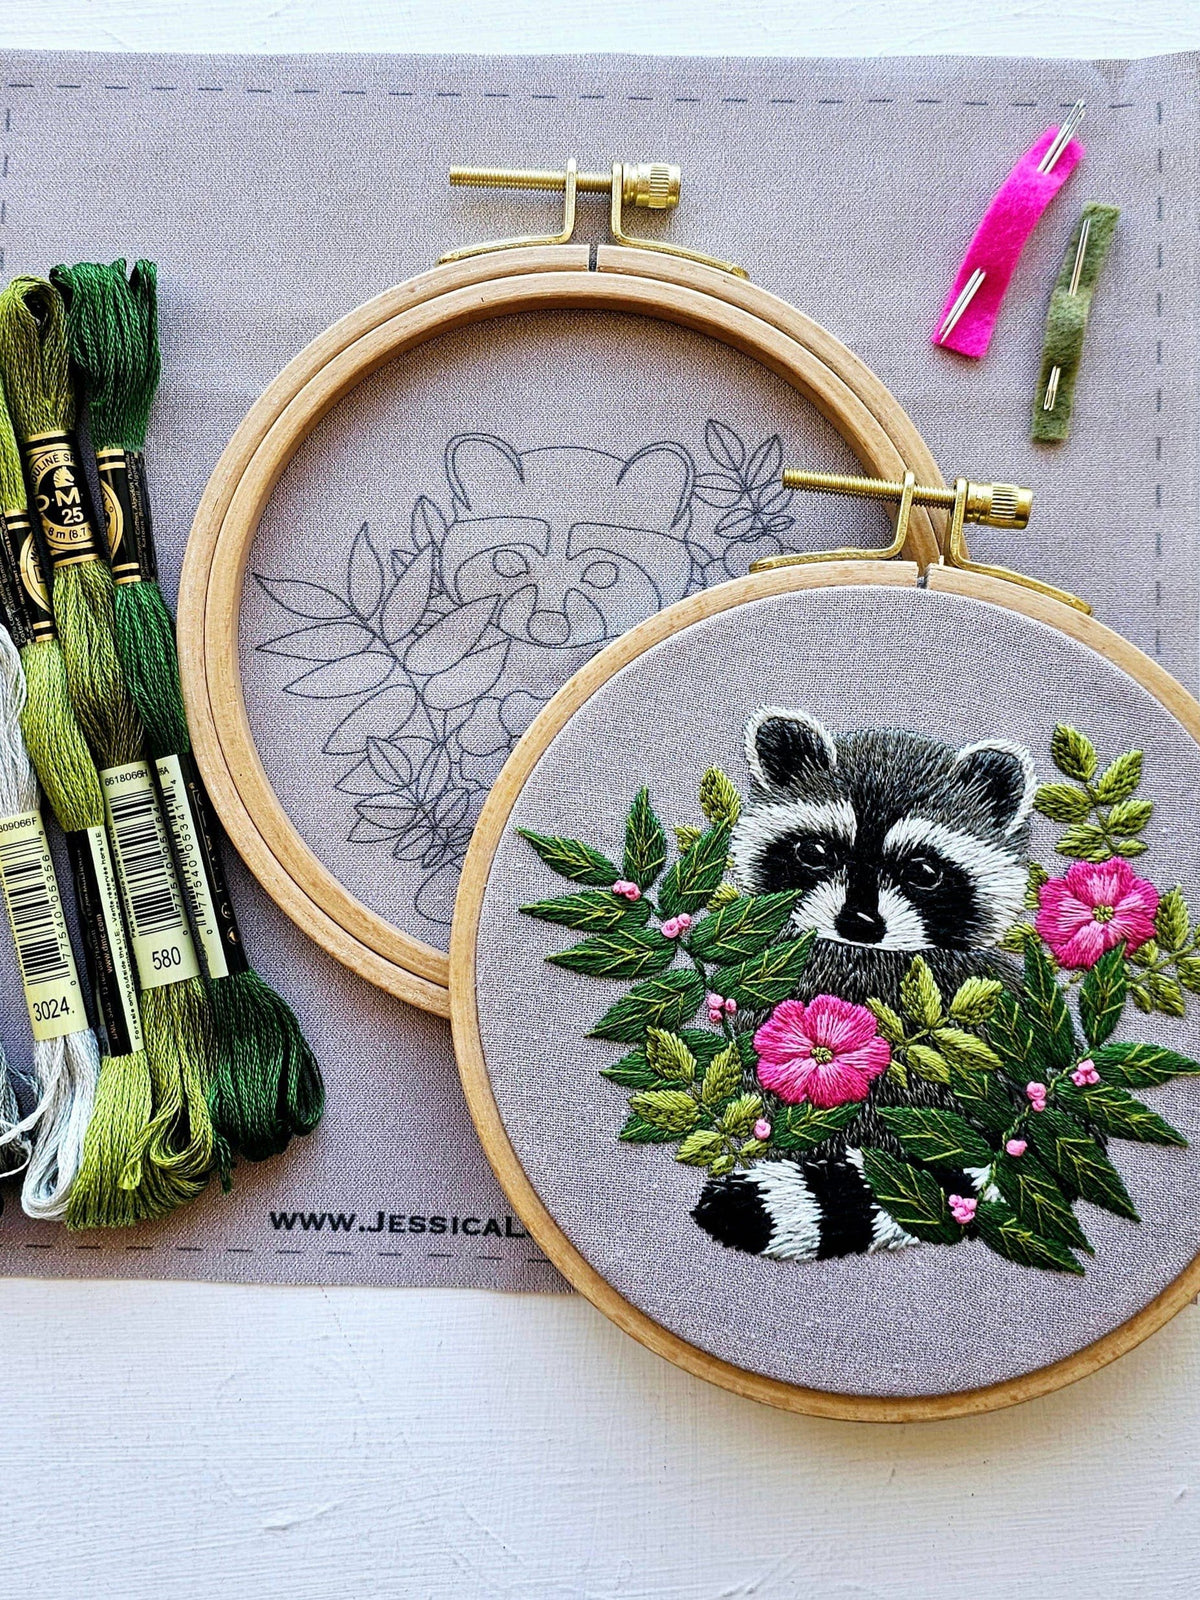 Jessica Long Embroidery Embroidery Kit Raccoon Embroidery Kit